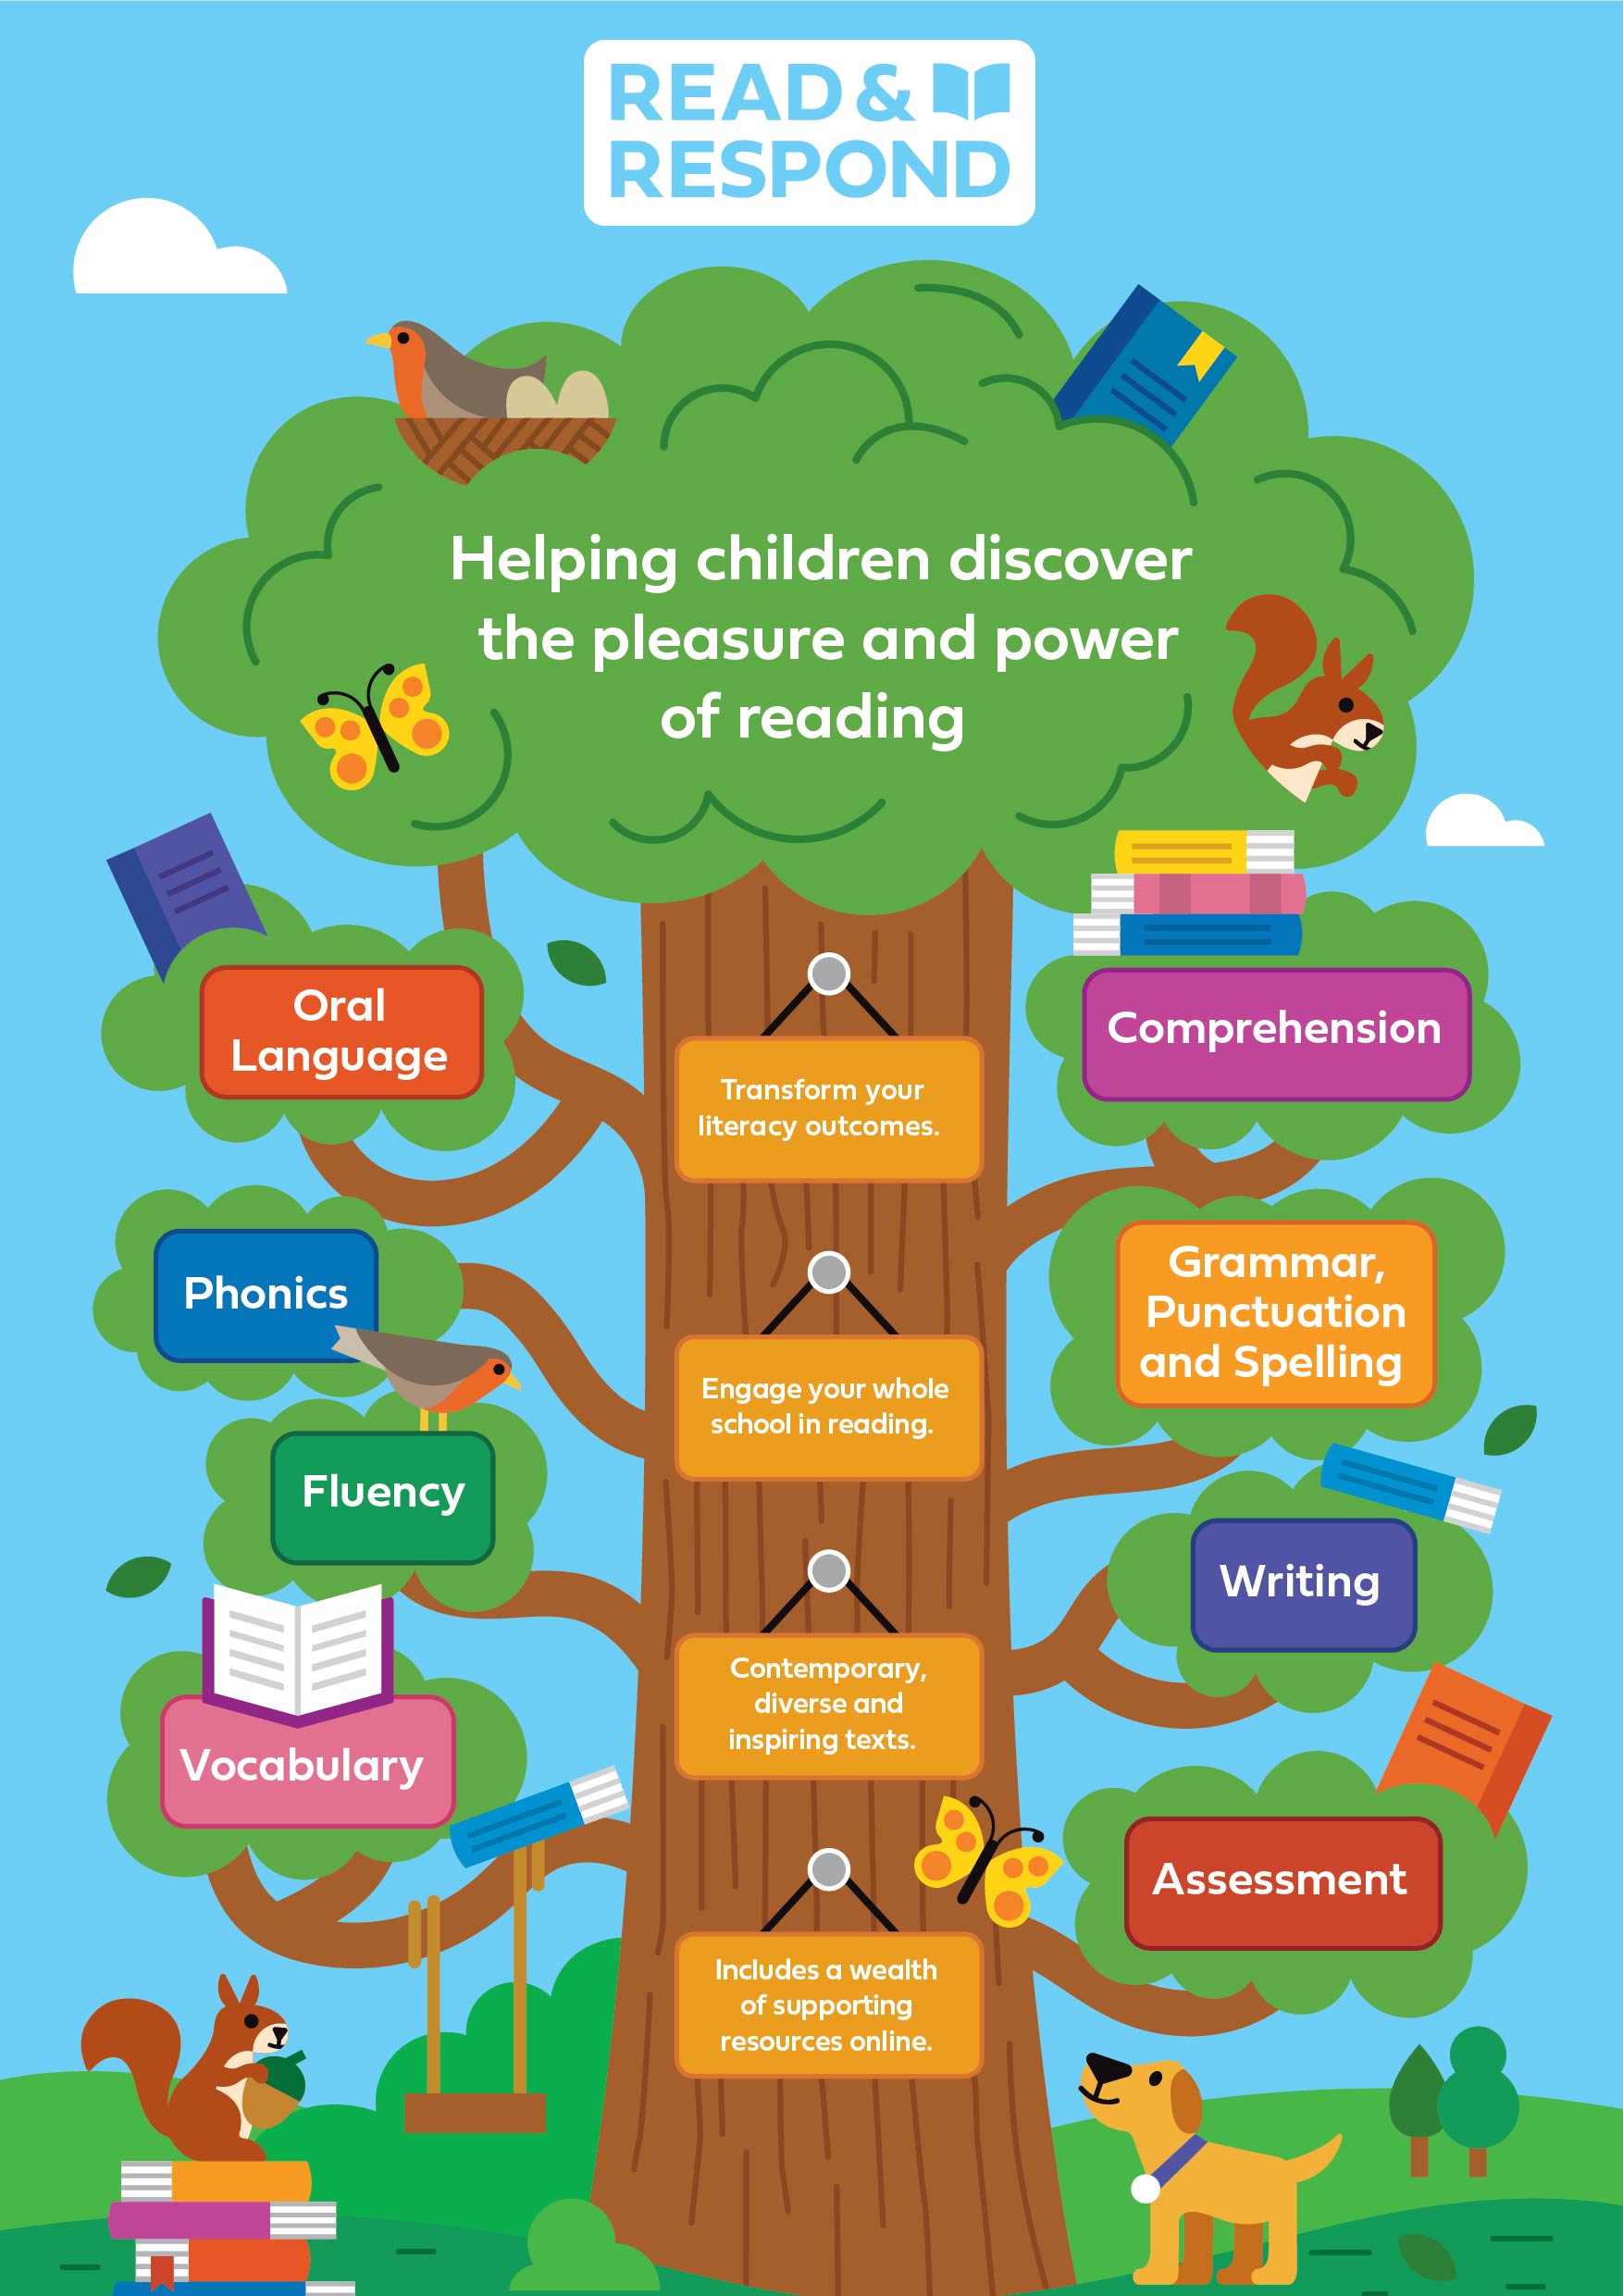 read-respond-helping-children-to-discover-the-pleasure-and-power-of